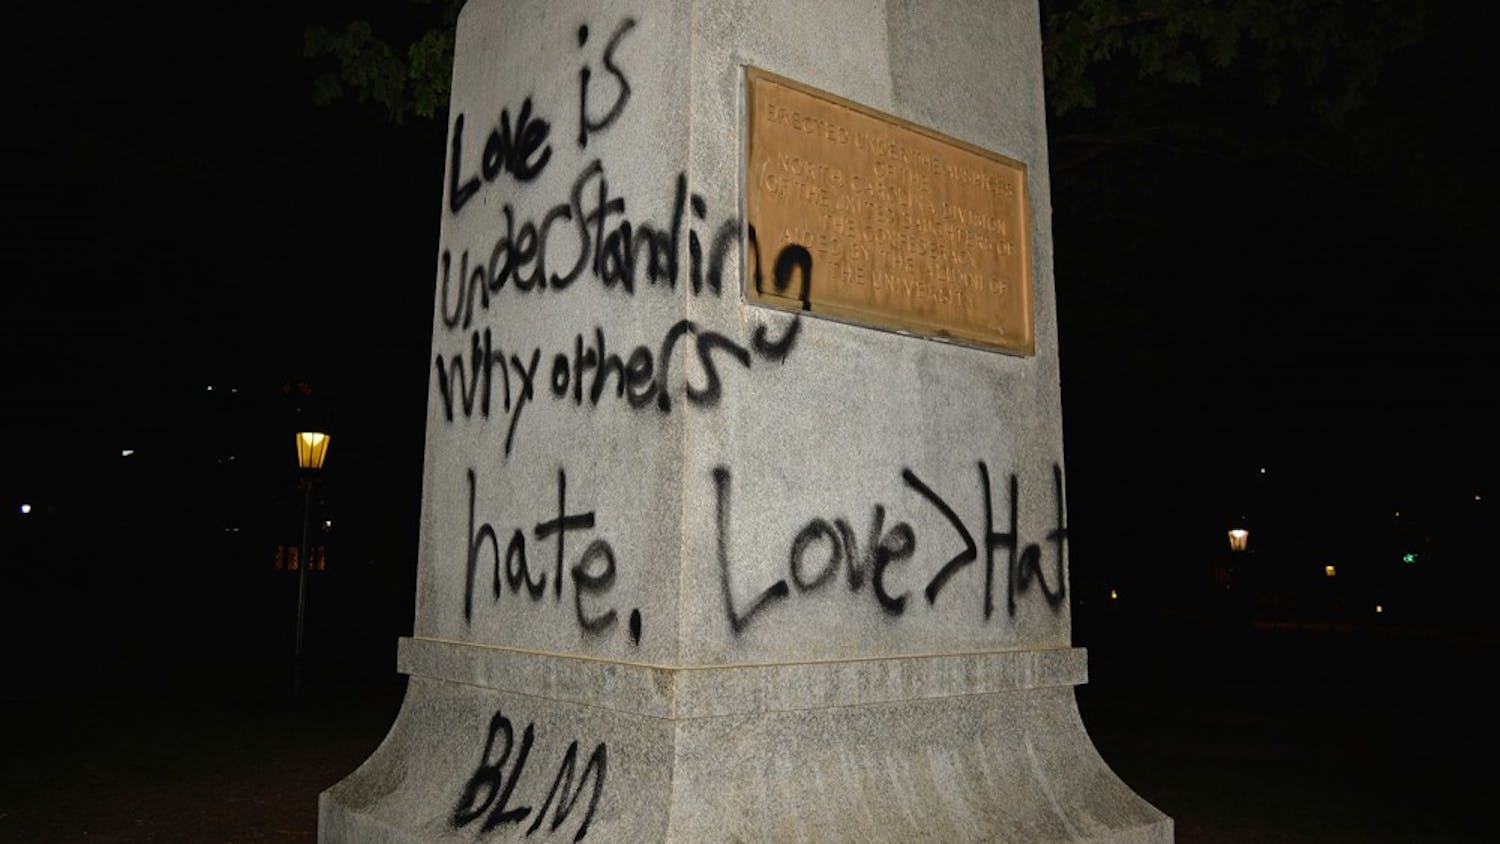 The Silent Sam Statue was spray-painted with the words, "Love is understanding why others hate. Love &gt; Hate. BLM," on Friday night.&nbsp;